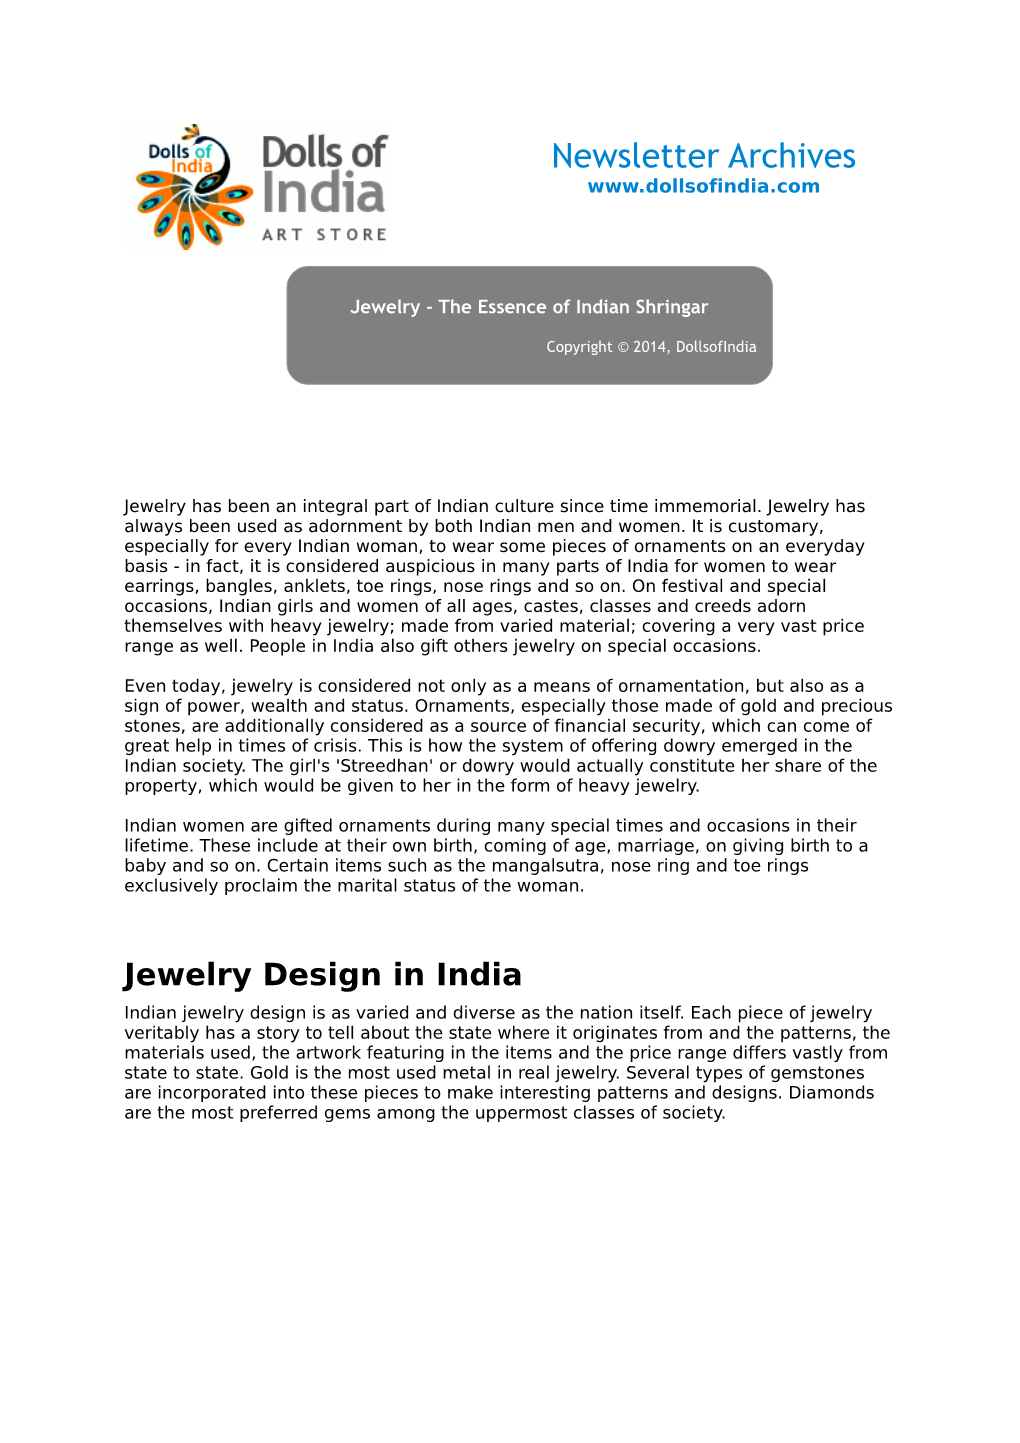 Types of Jewelry Let Us Now Talk About the Different Types of Jewelry Used by Women in India